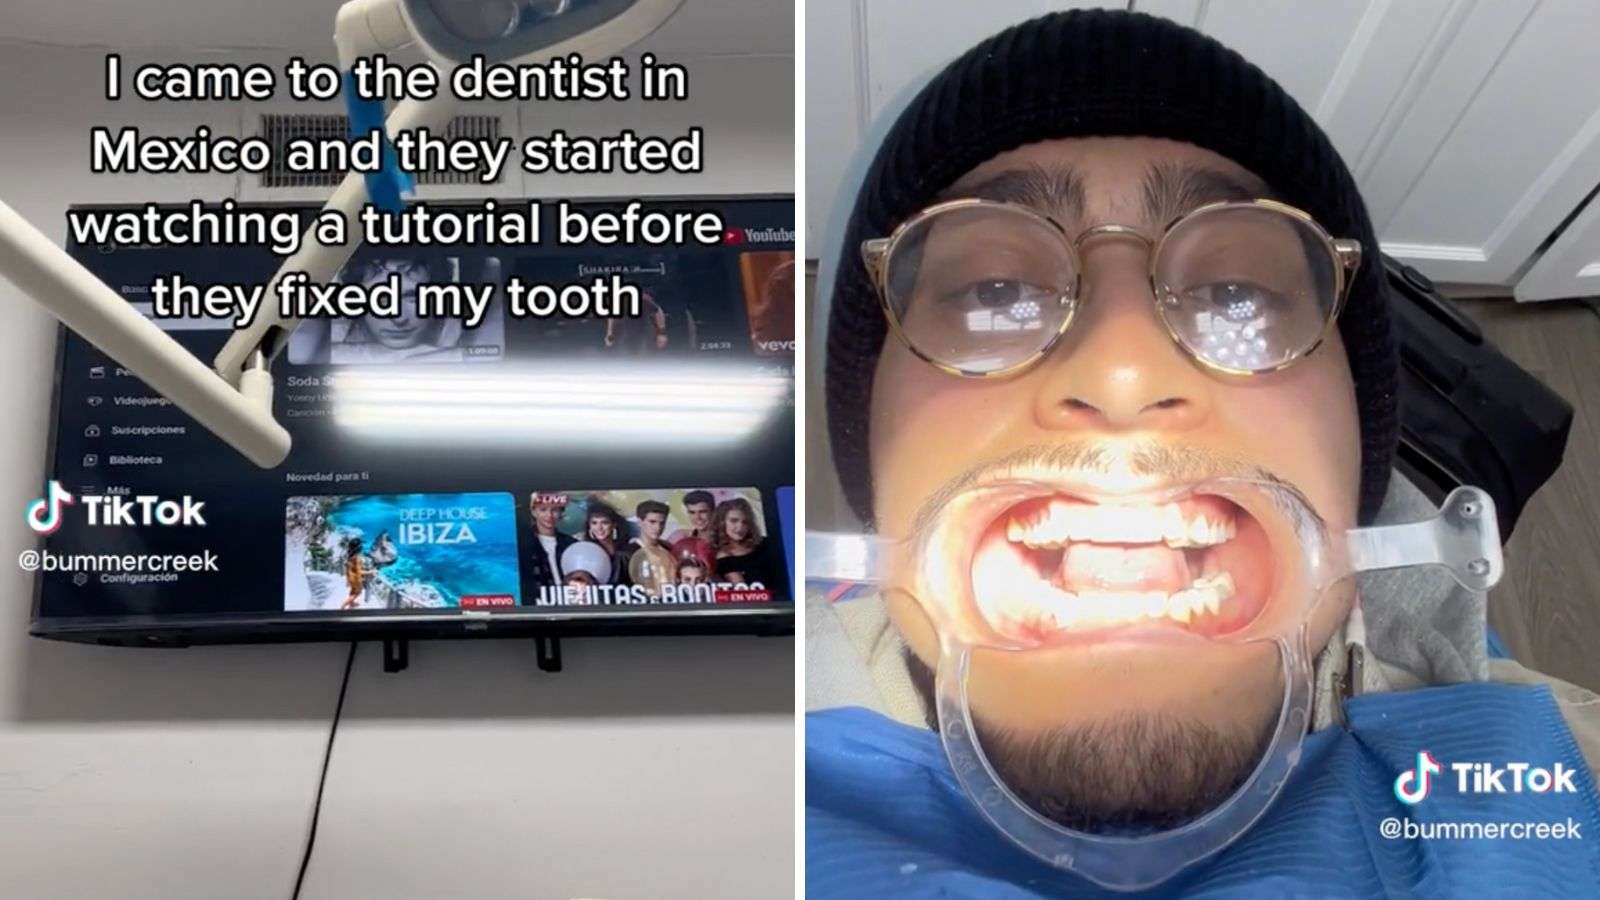 Dentist watches tutorial before fixing patient’s tooth in viral video